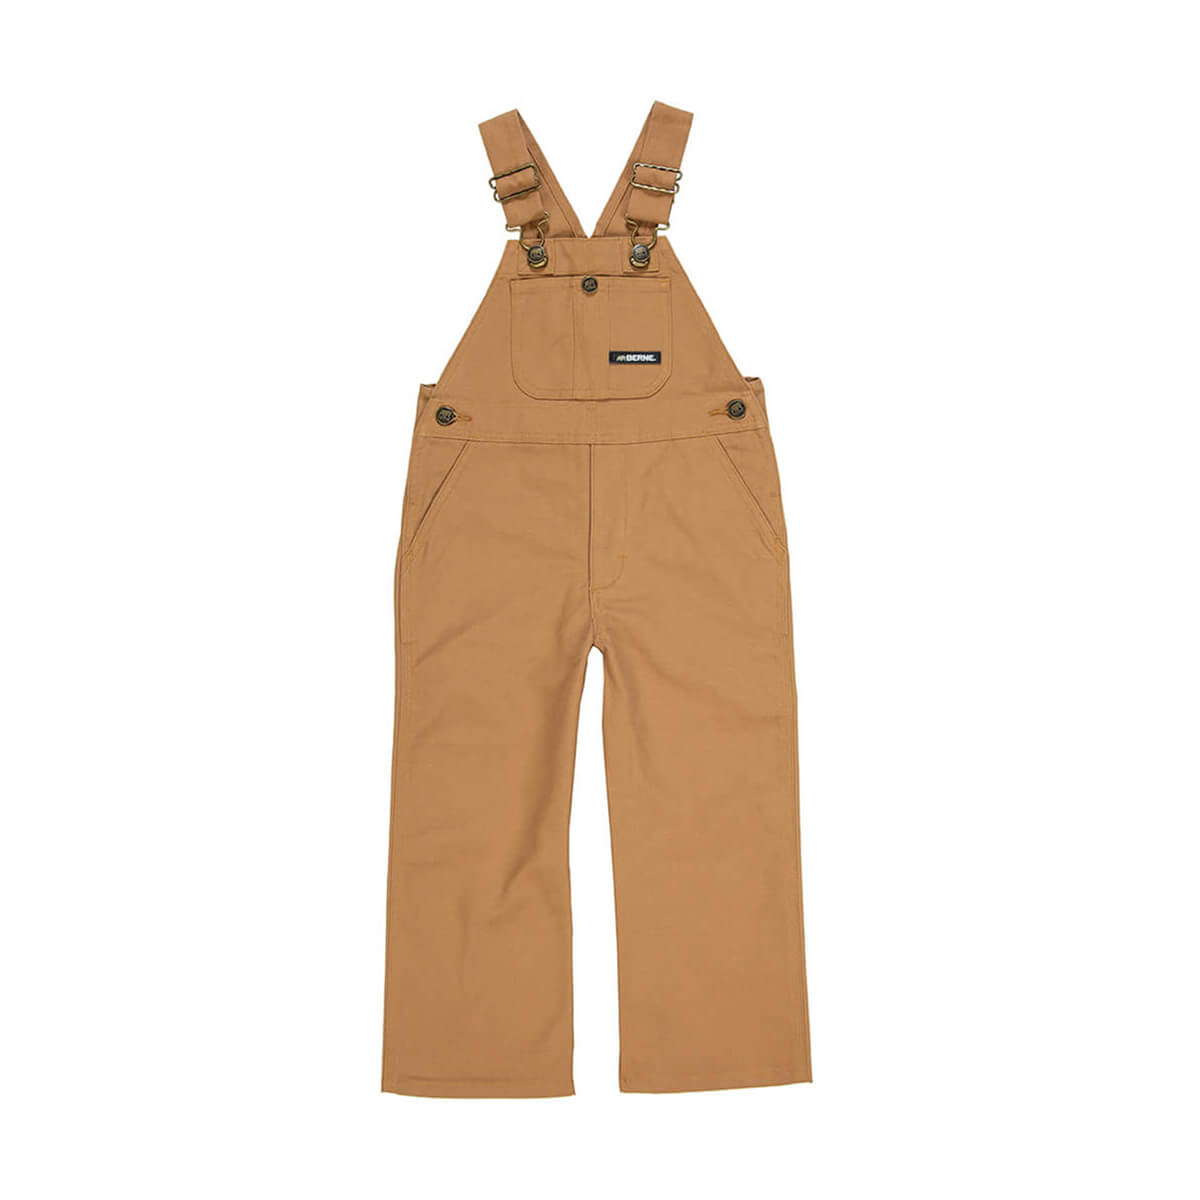 Berne Youth Unlined Overalls